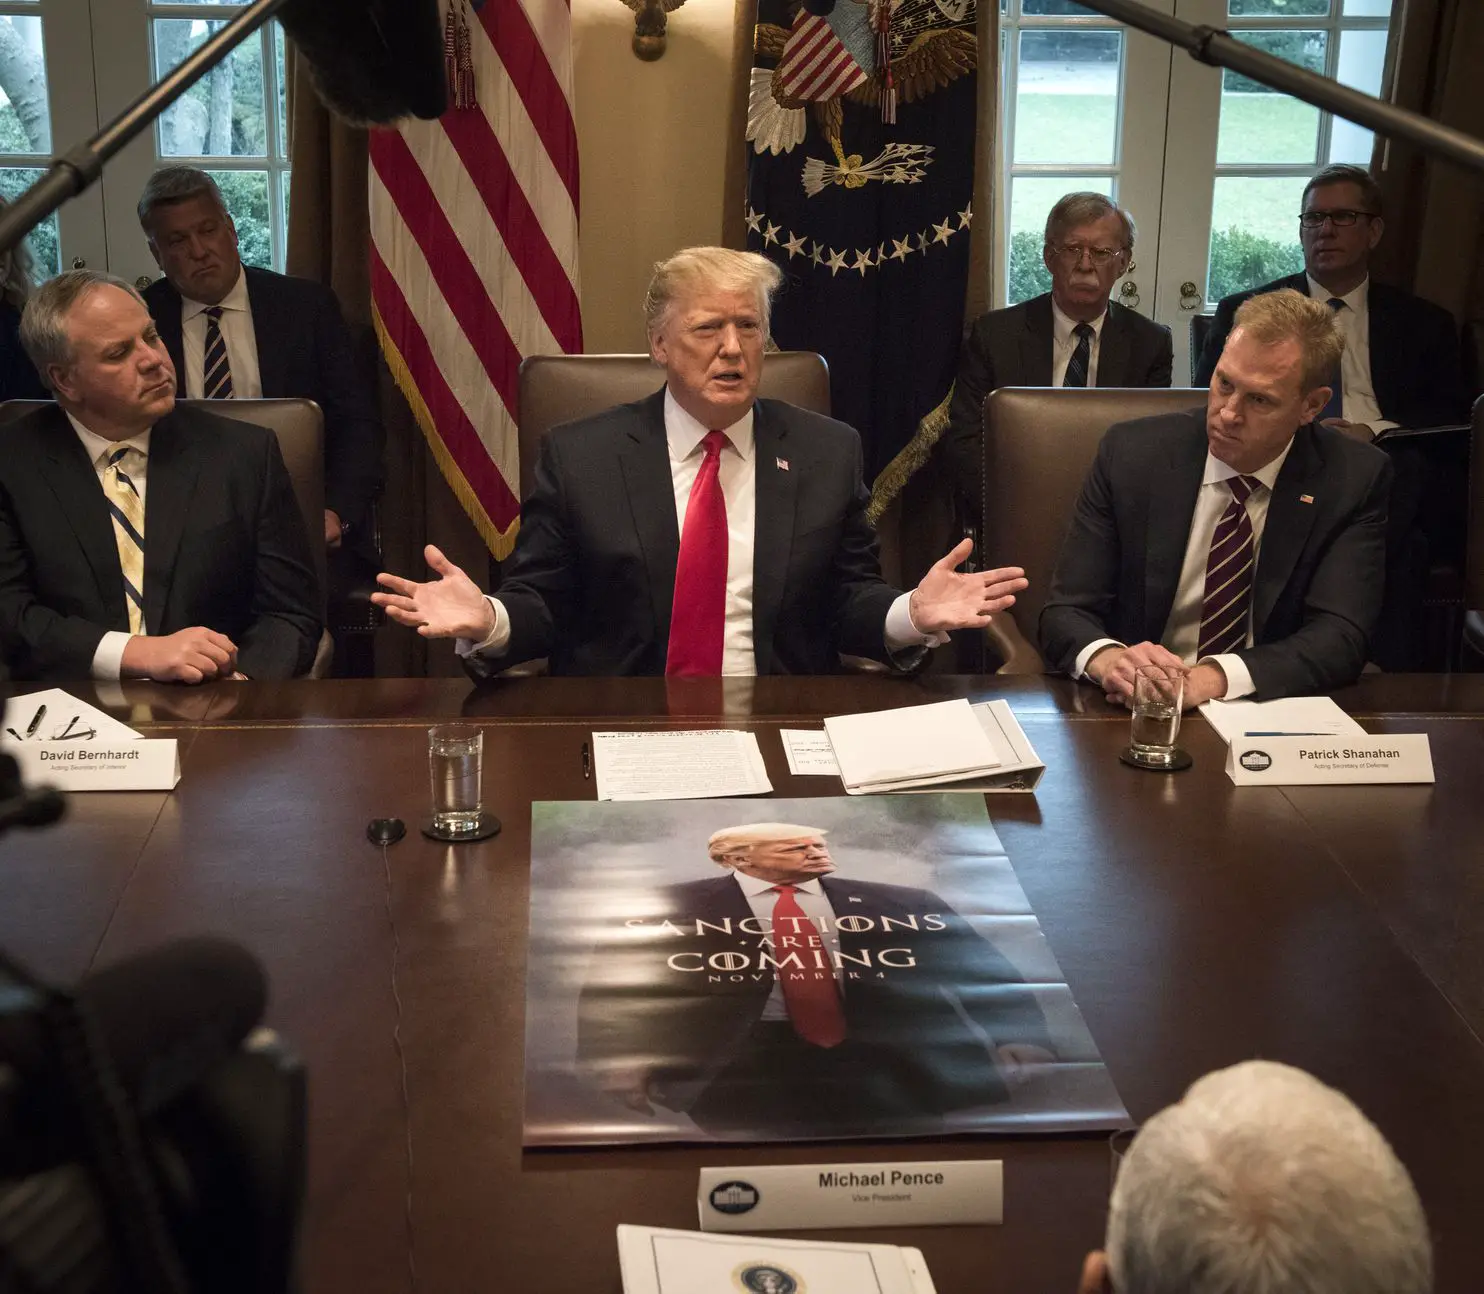 A defensive Trump calls a Cabinet meeting and uses it to boast, deflect ...